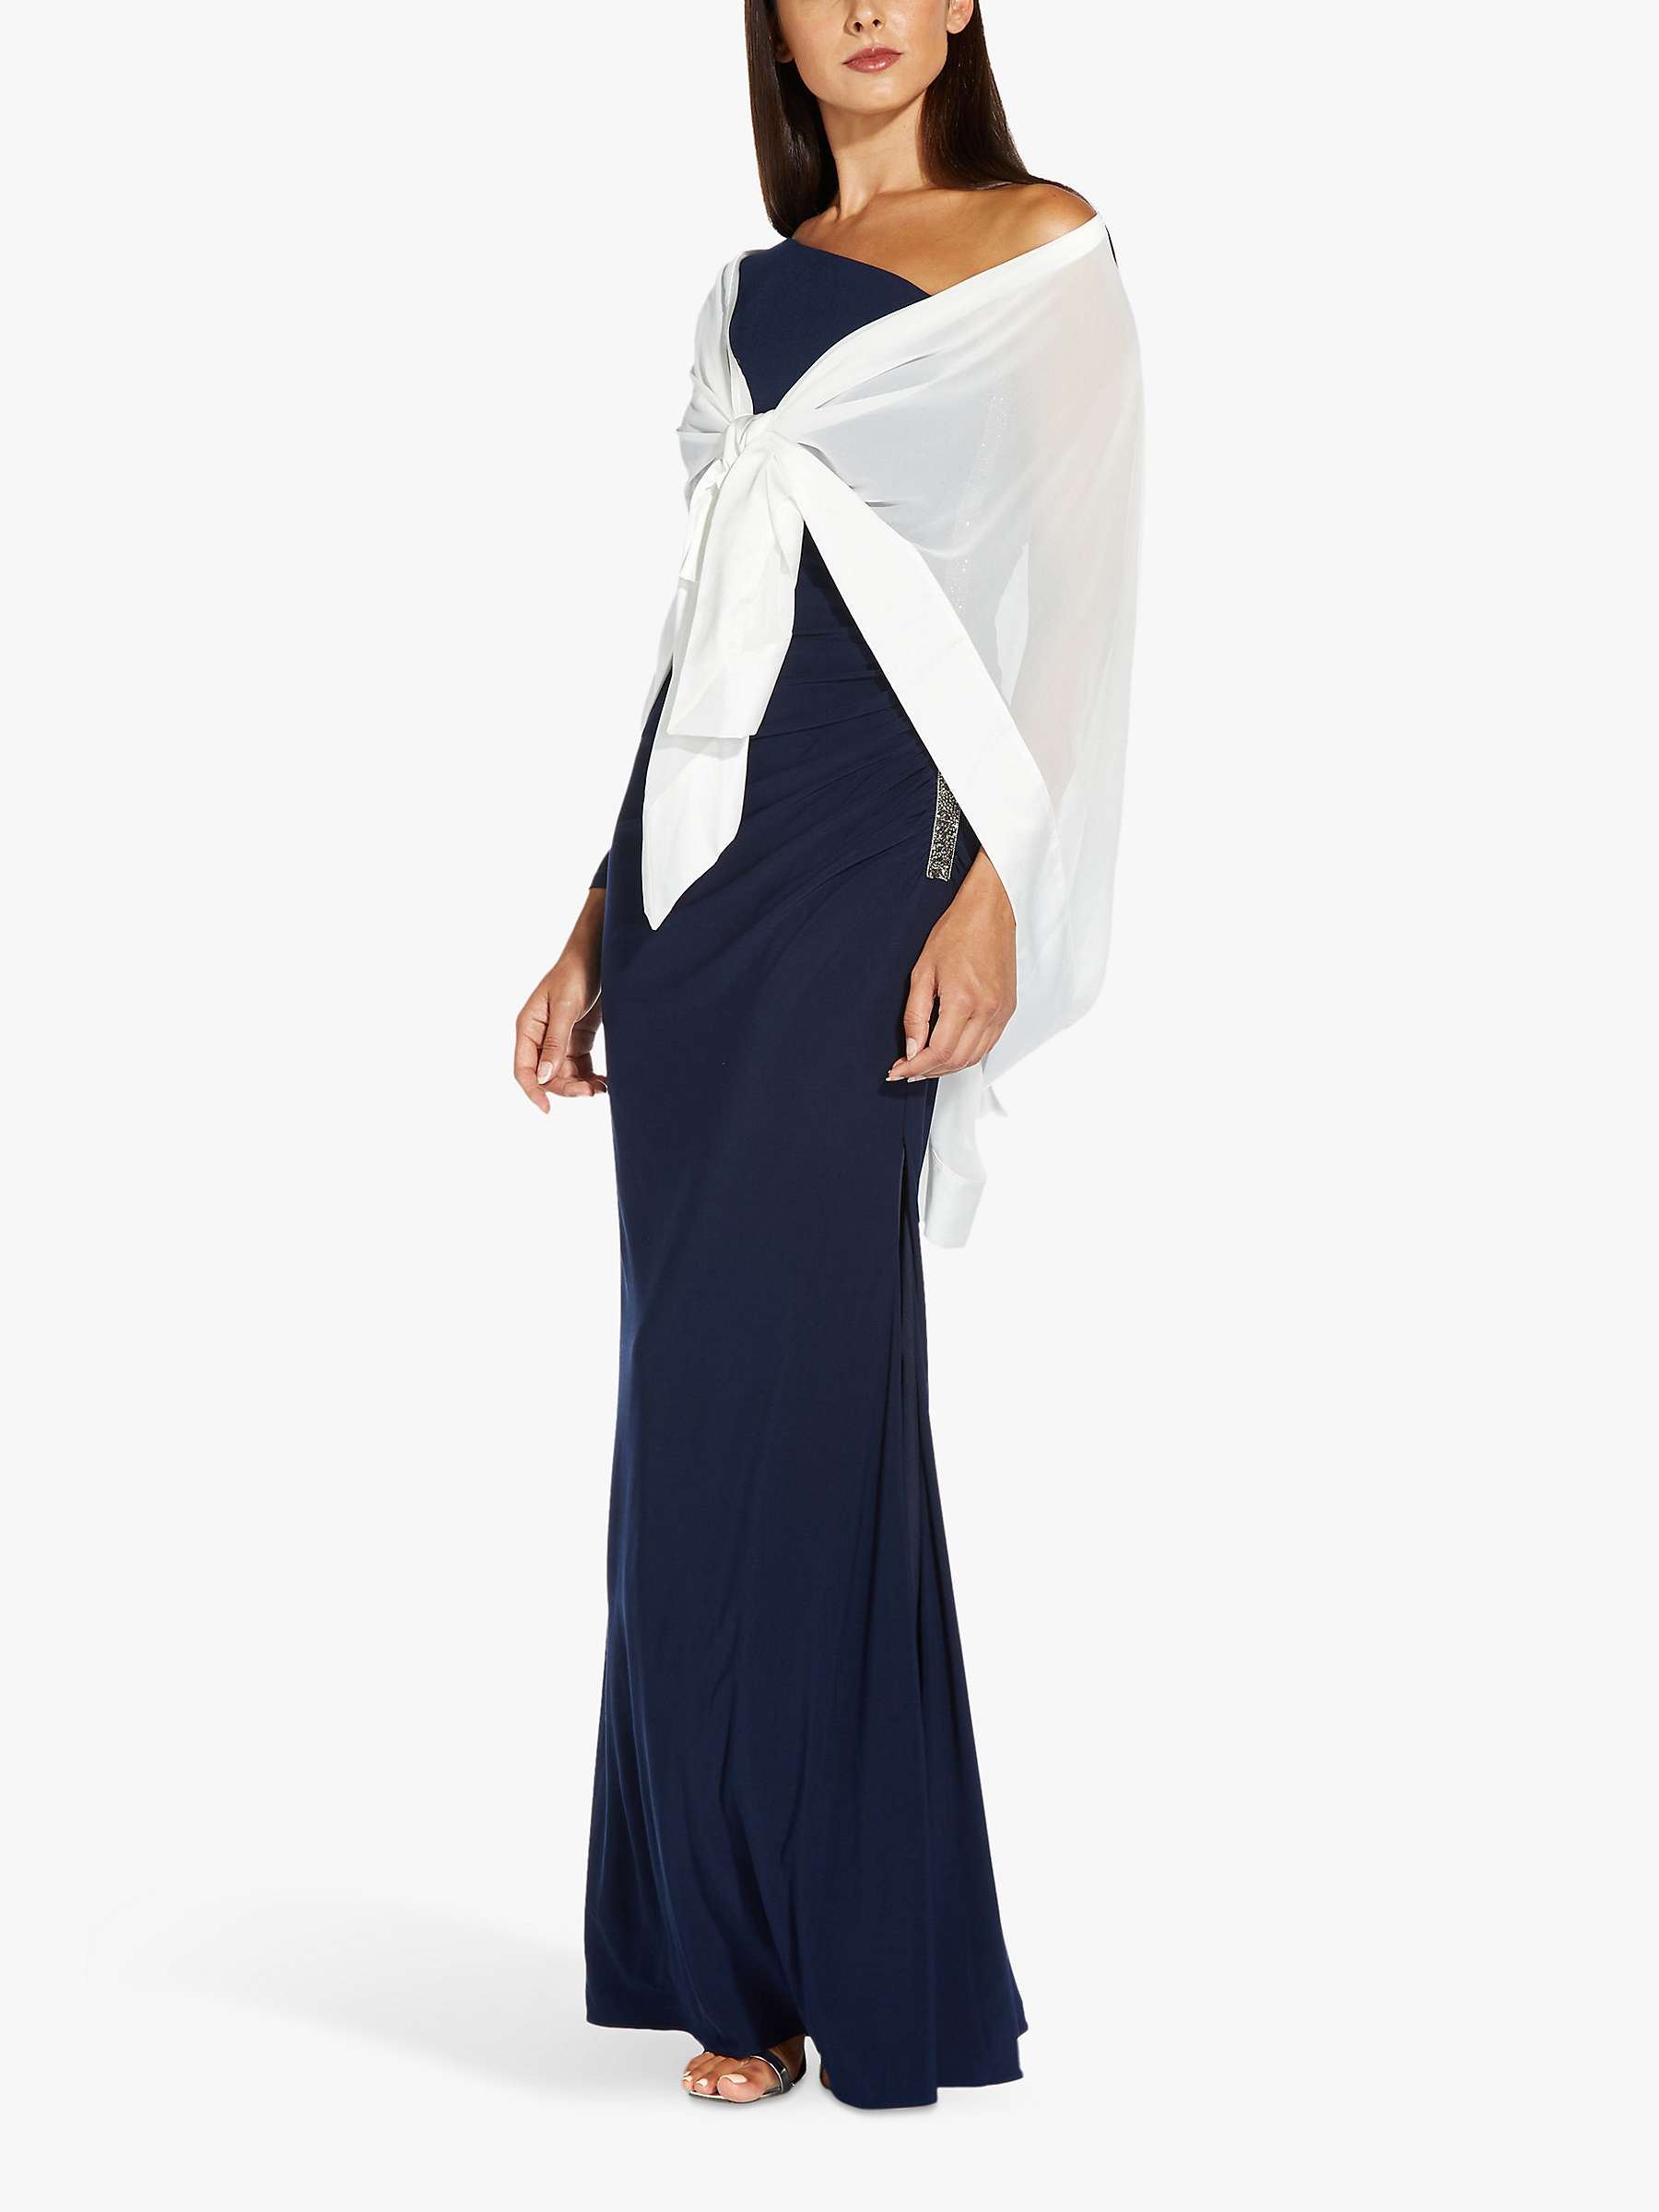 Buy Adrianna Papell Chiffon Cape Coverup, Ivory Online at johnlewis.com